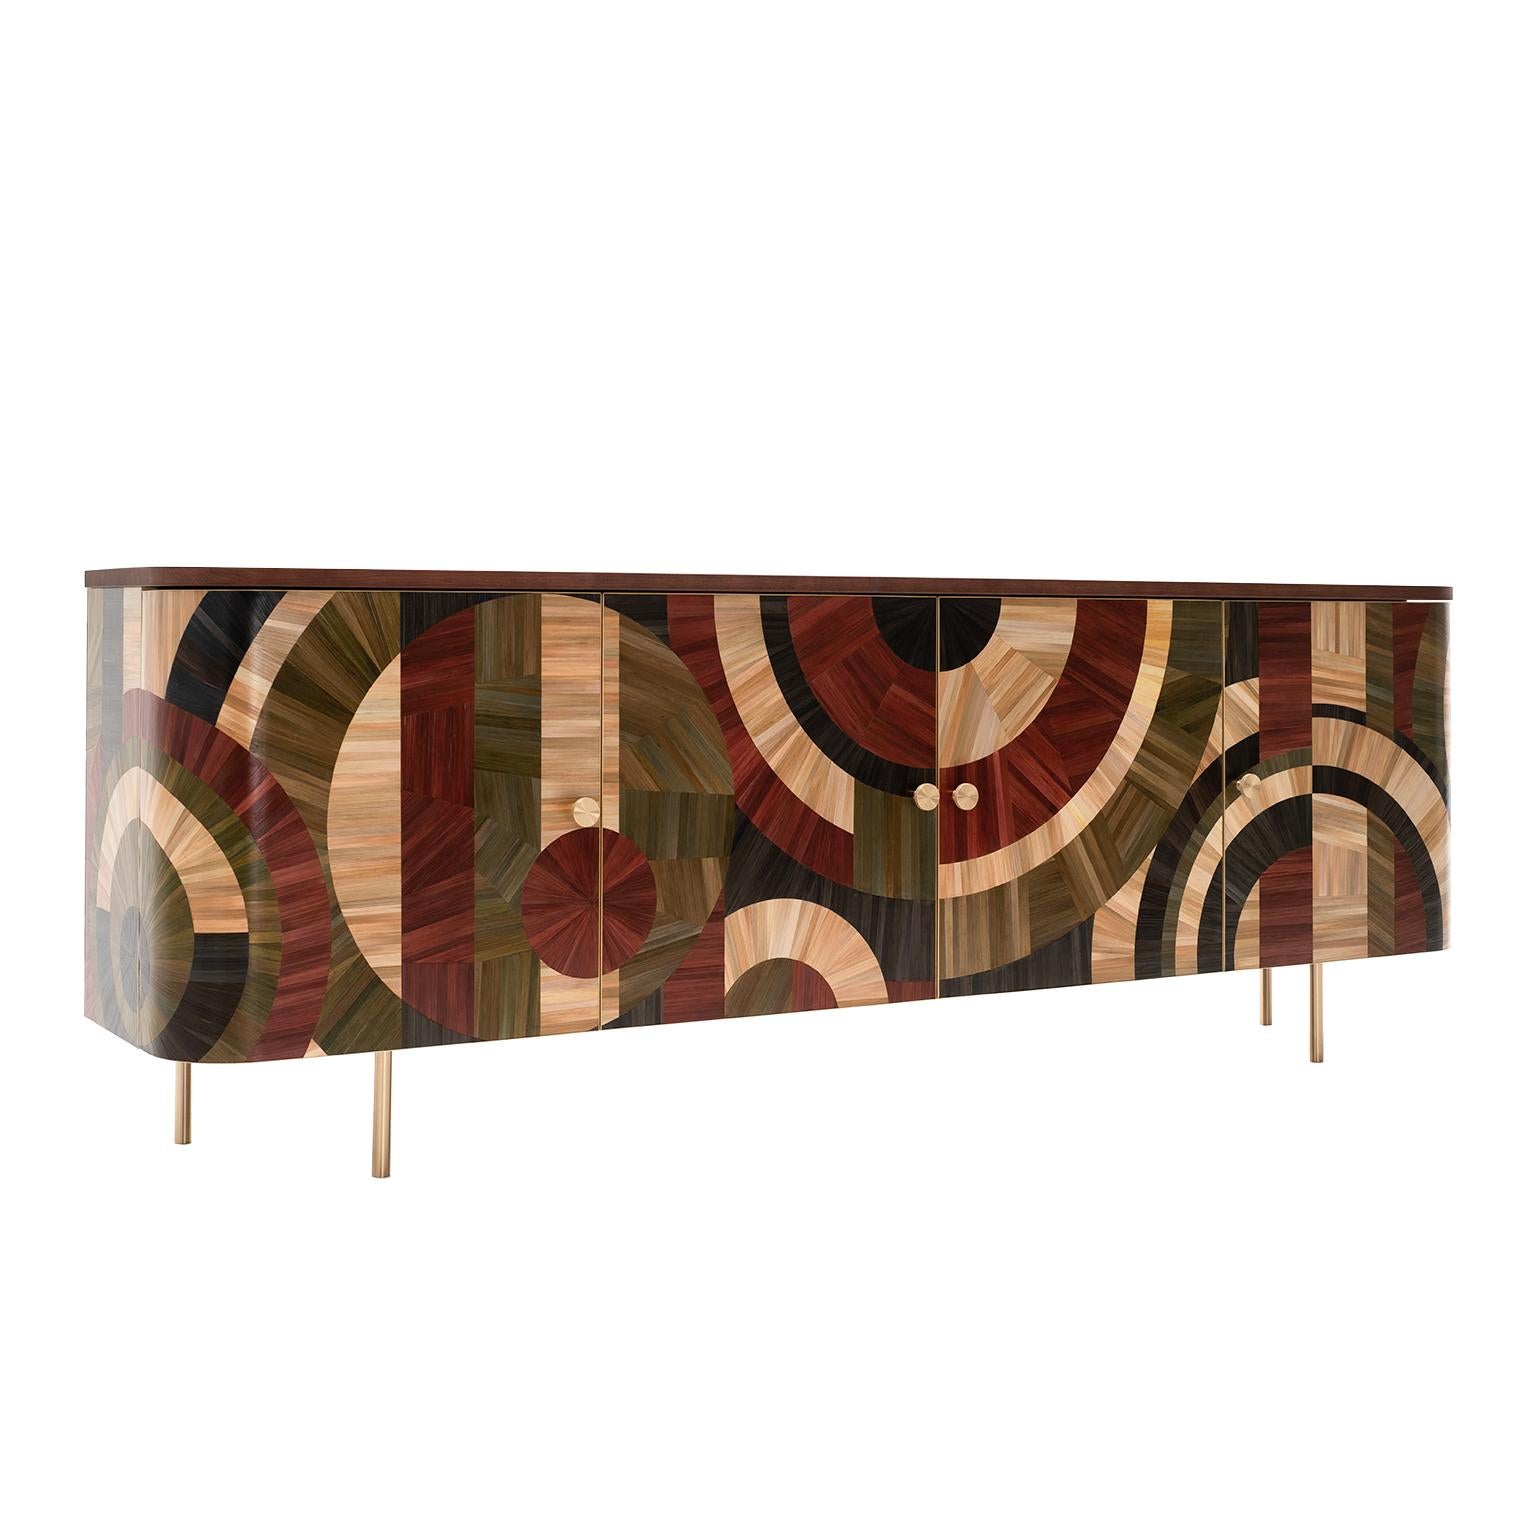 Solomia Straw Marquetry Art Deco Wood Cabinet Red Wine Olive Black Natural by RUDA Studio

The cabinet Solomia is inspired by the fertility of our land. The ornament is made in the ancient straw marquetry technique in wine, olive, black soil, and